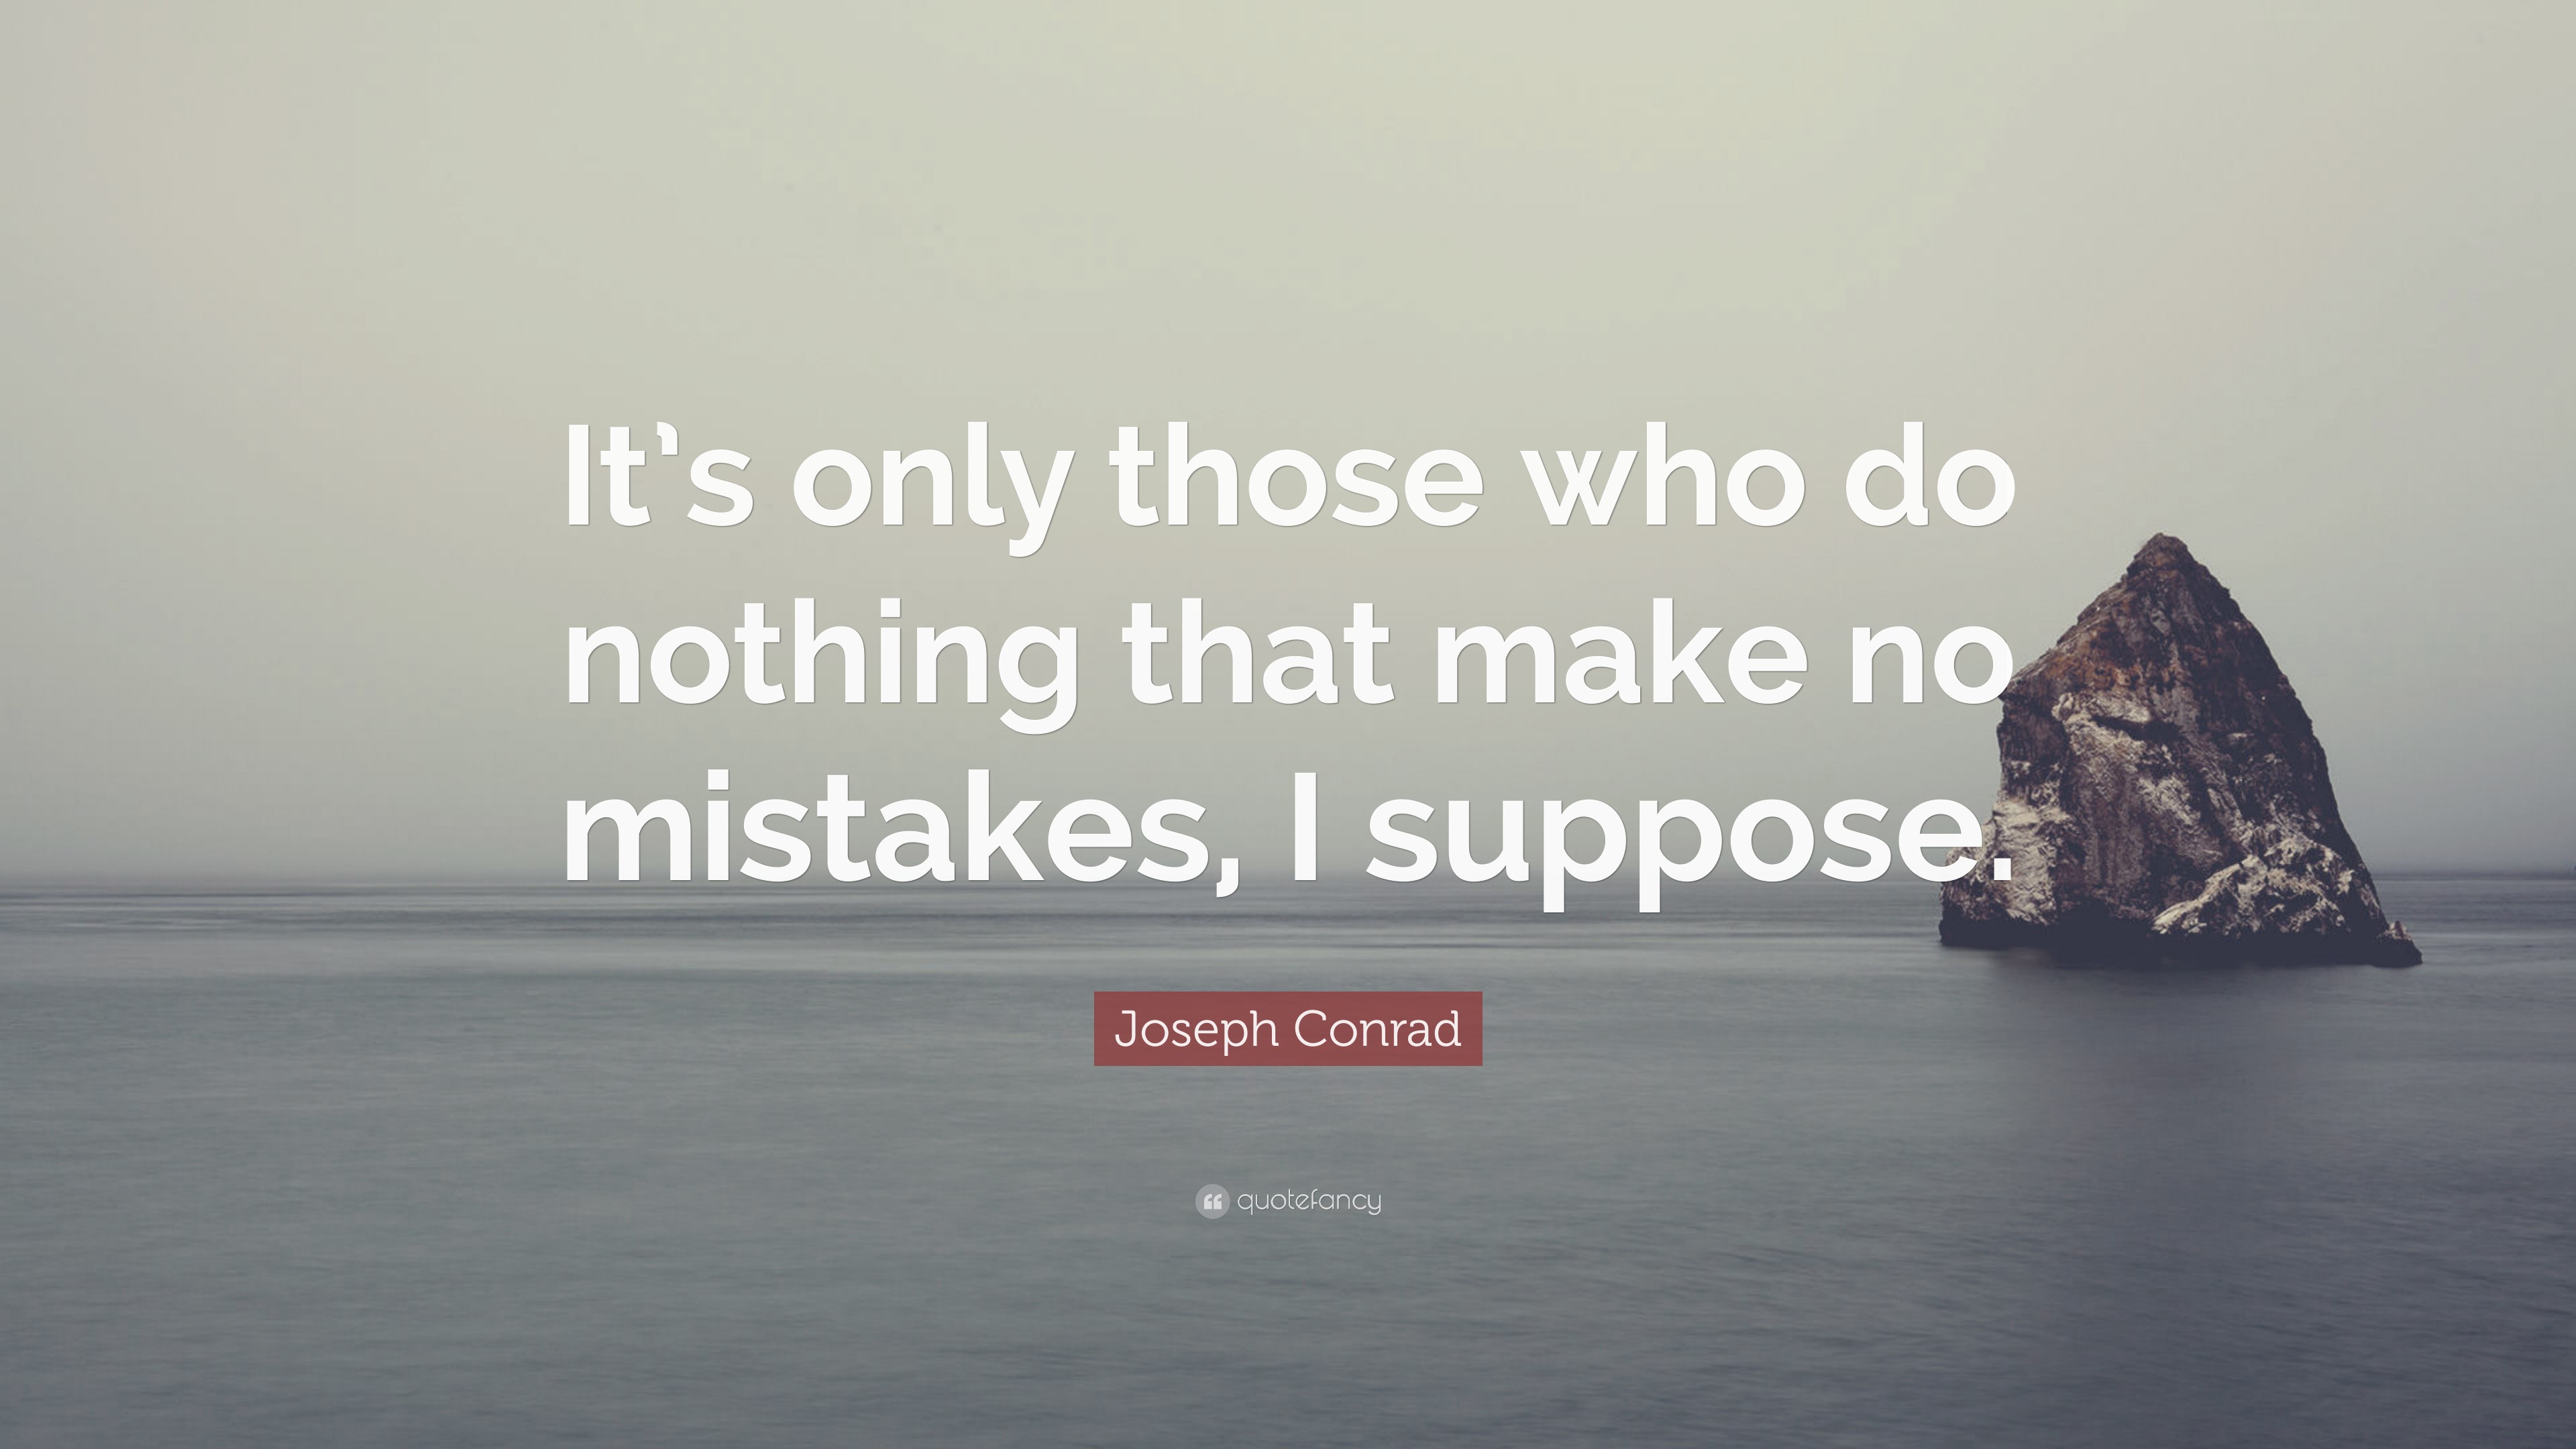 Joseph Conrad Quote: “It’s only those who do nothing that make no ...